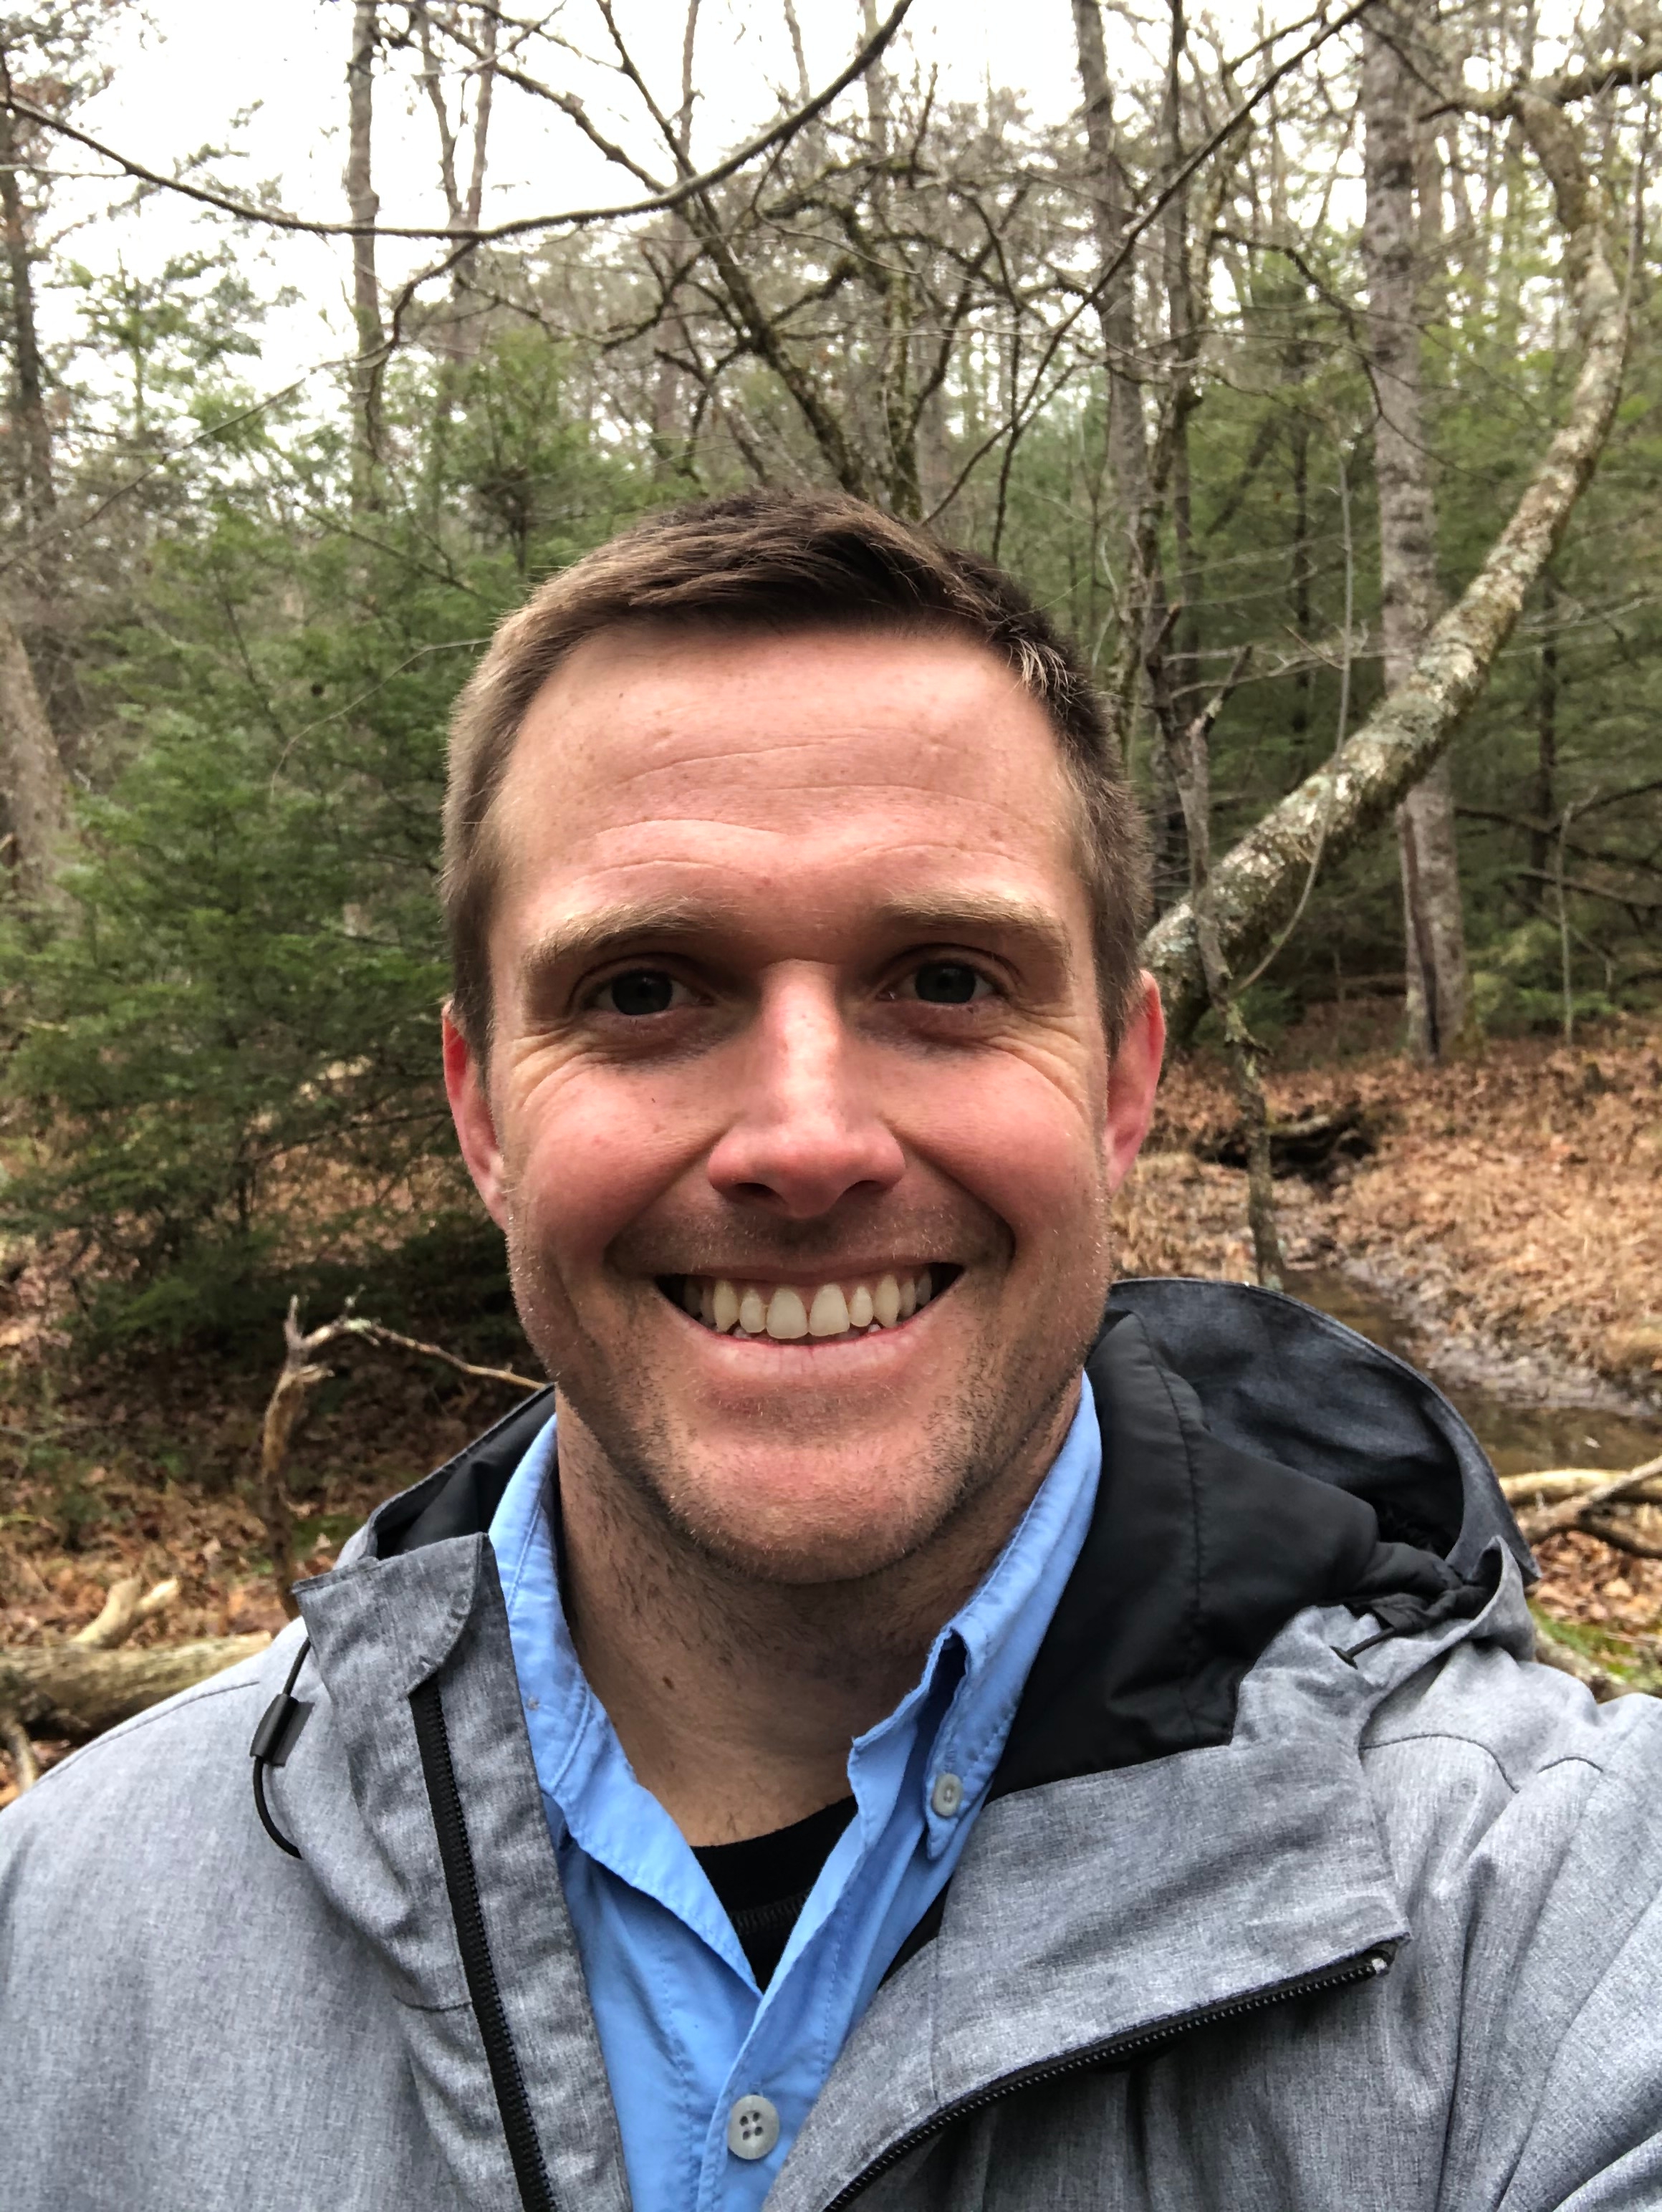 This photo shows a young white male dressed in a blue shirt with a gray hooded windbreaker over it. He is smiling at the camera. The background is scrub forest.